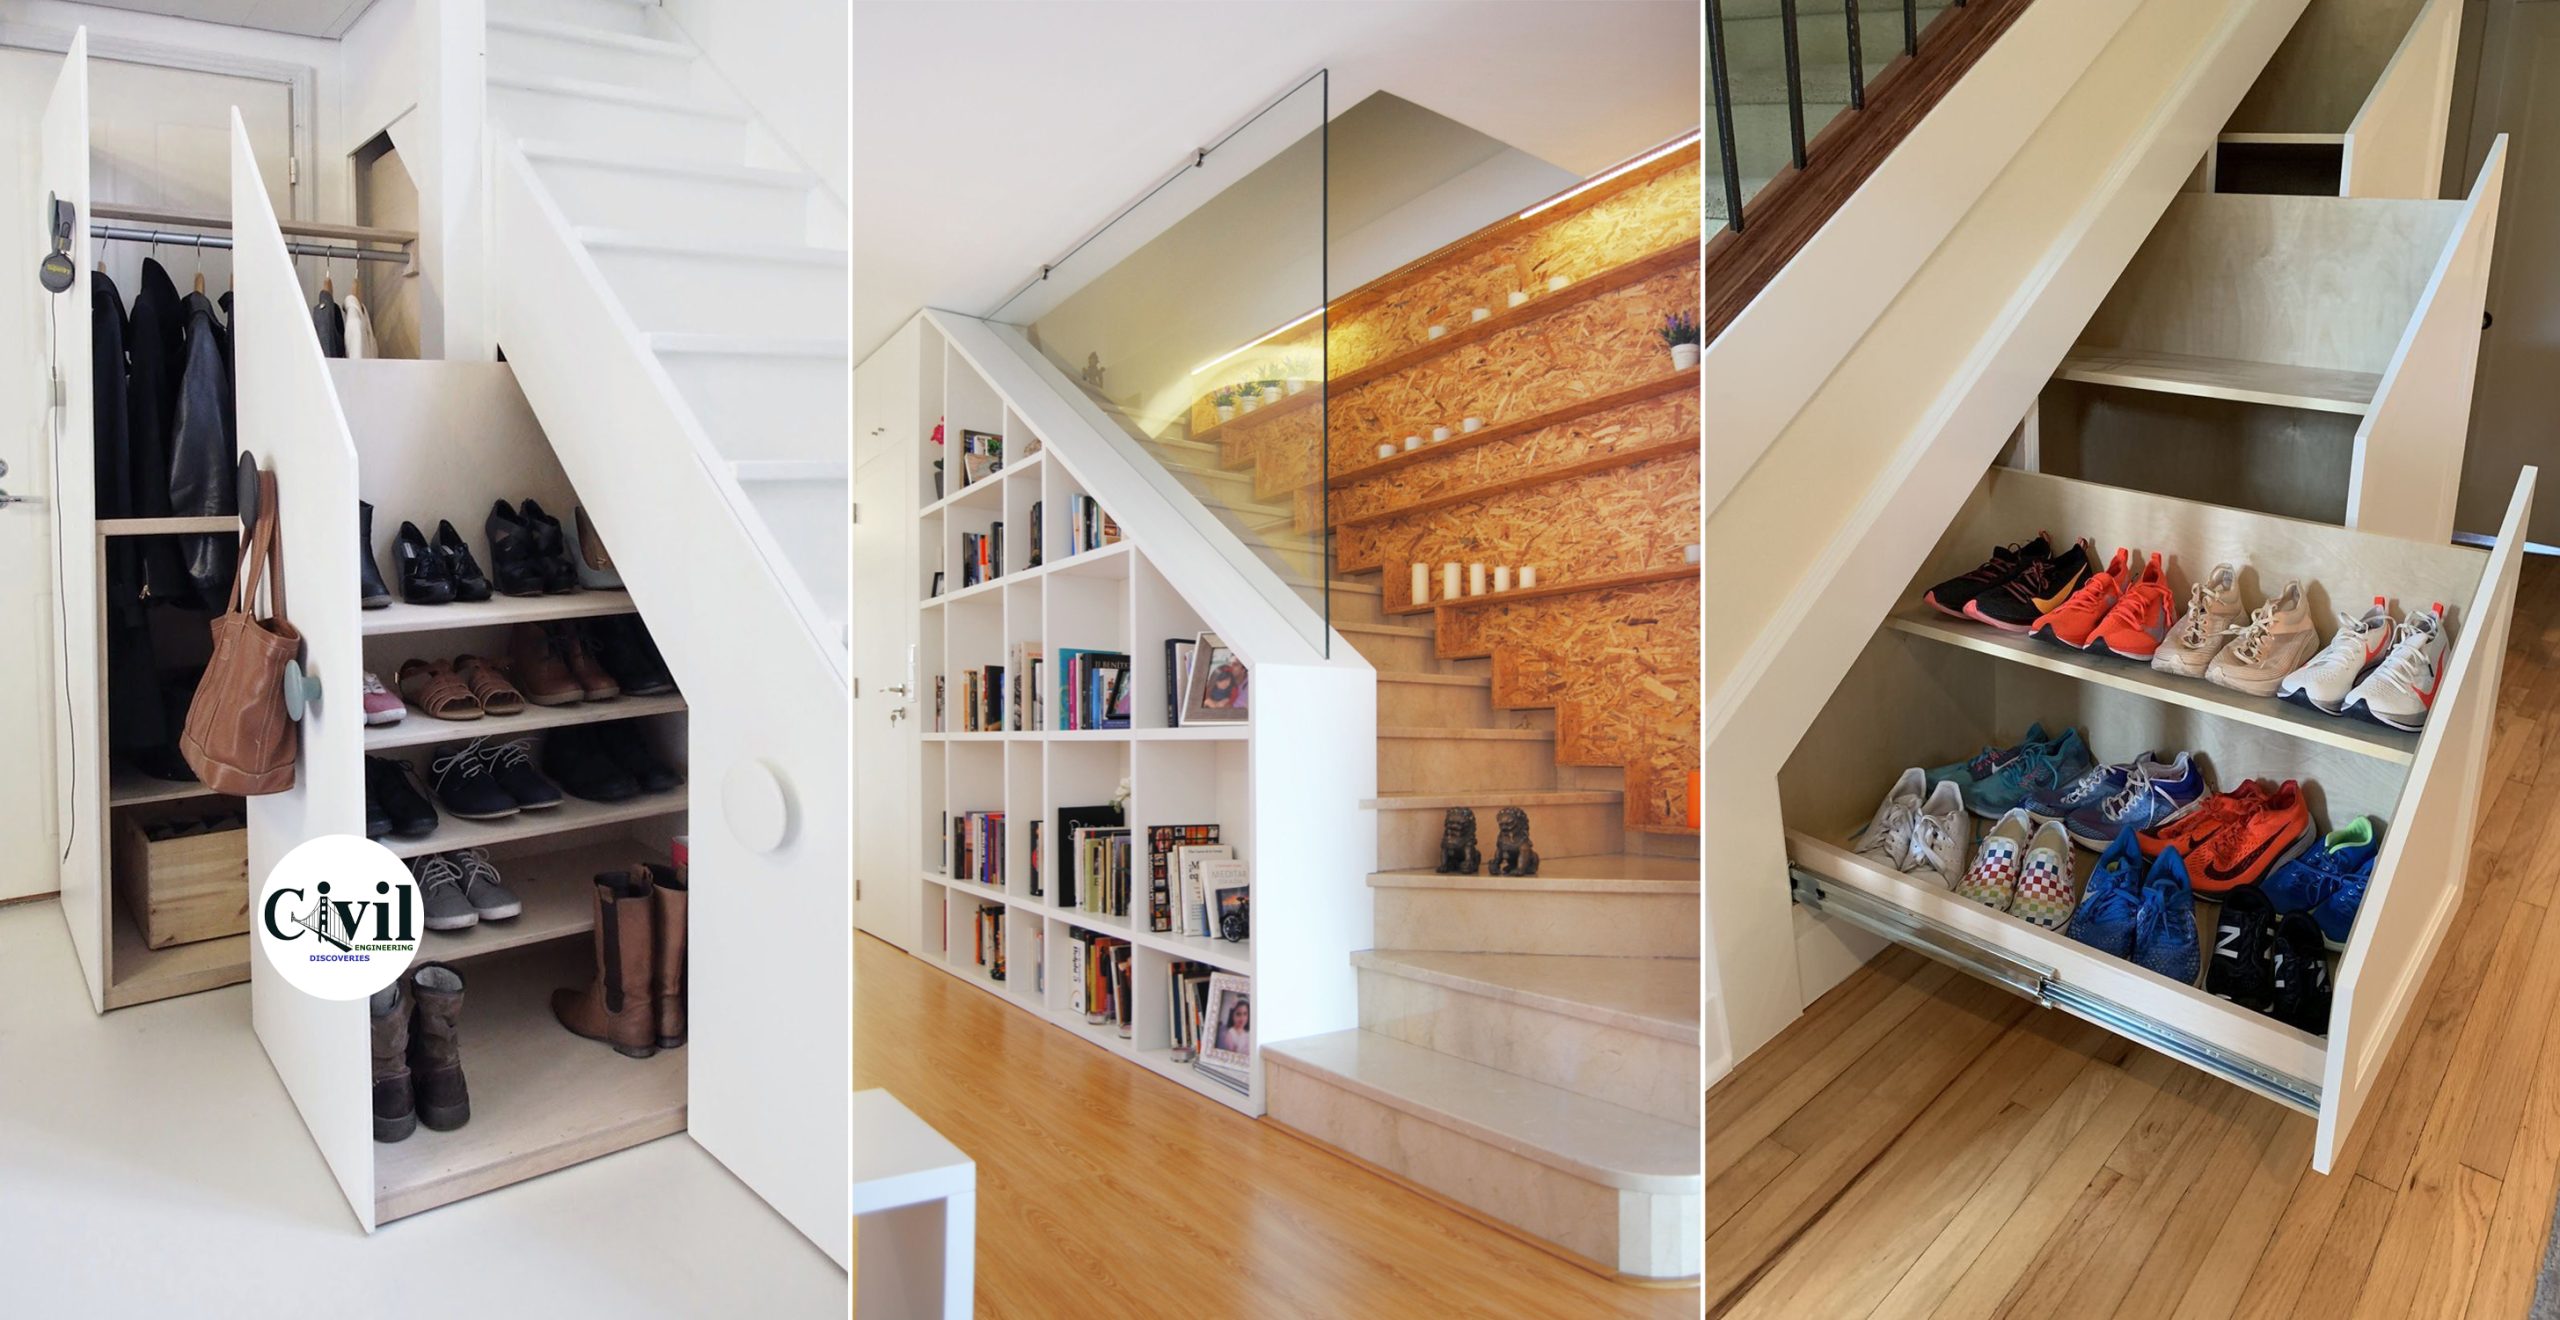 https://engineeringdiscoveries.com/wp-content/uploads/2021/02/30-Smart-Ideas-To-Utilize-Space-Under-Stairs-scaled.jpg